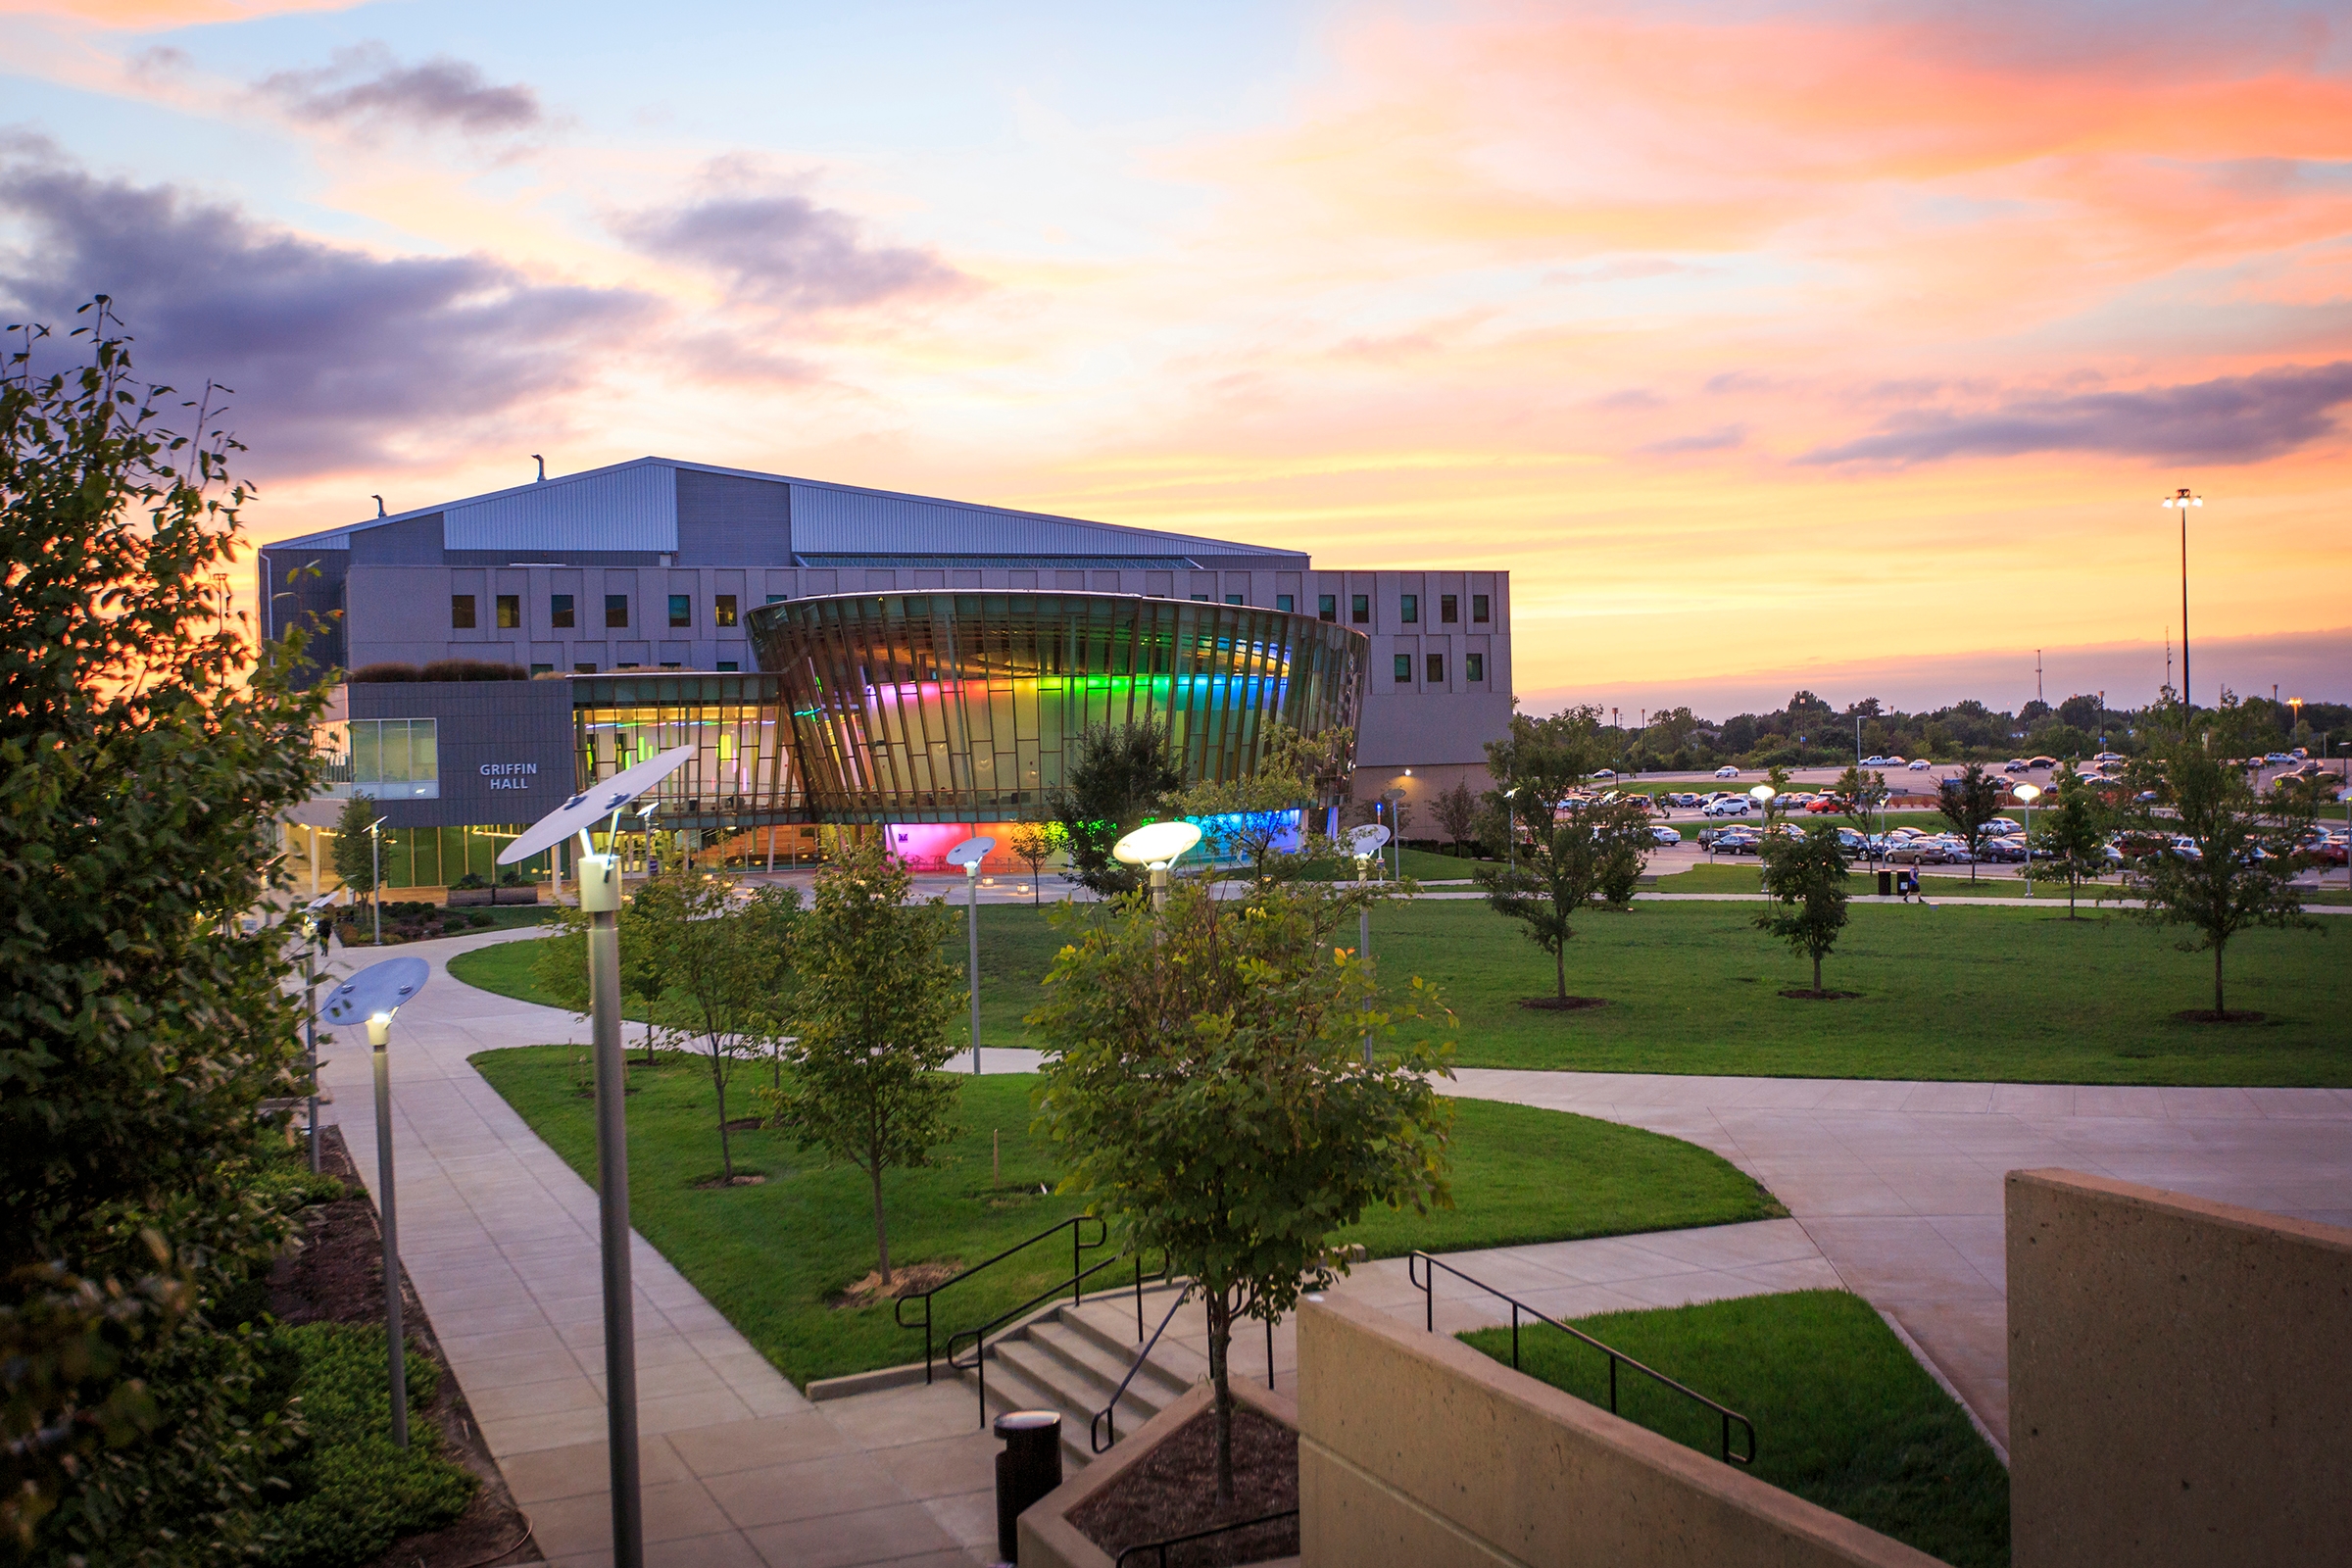 Griffin Hall pictured in front of a sunset with colorful lights surrounding the building's exterior